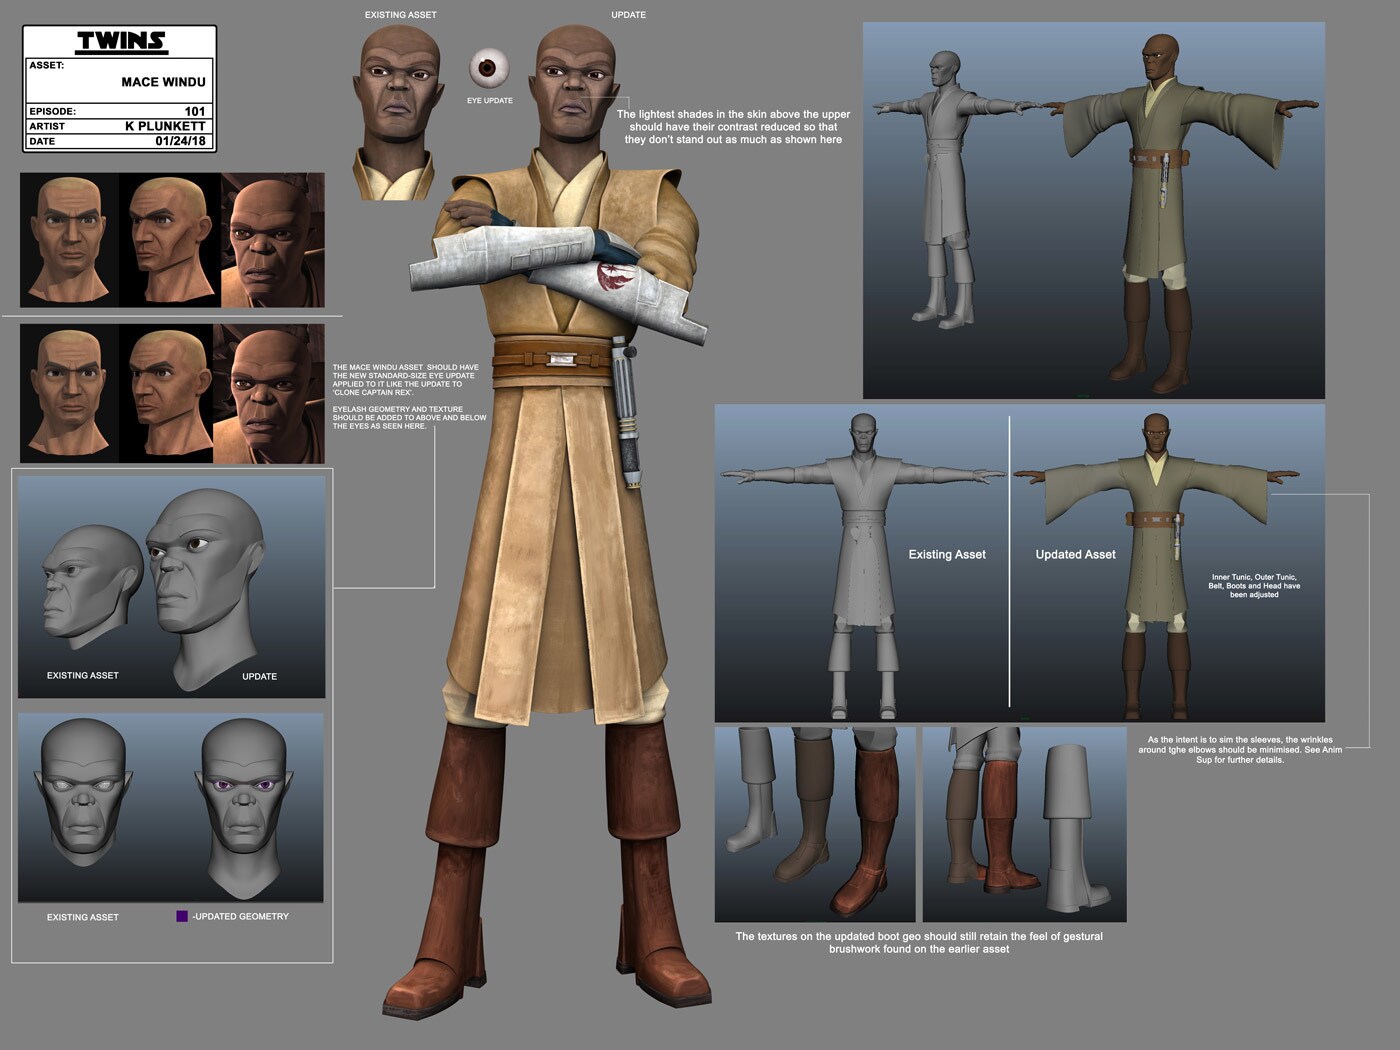 Mace Windu underwent quite a few updates for his appearance in this season. His Star Wars: The Cl...